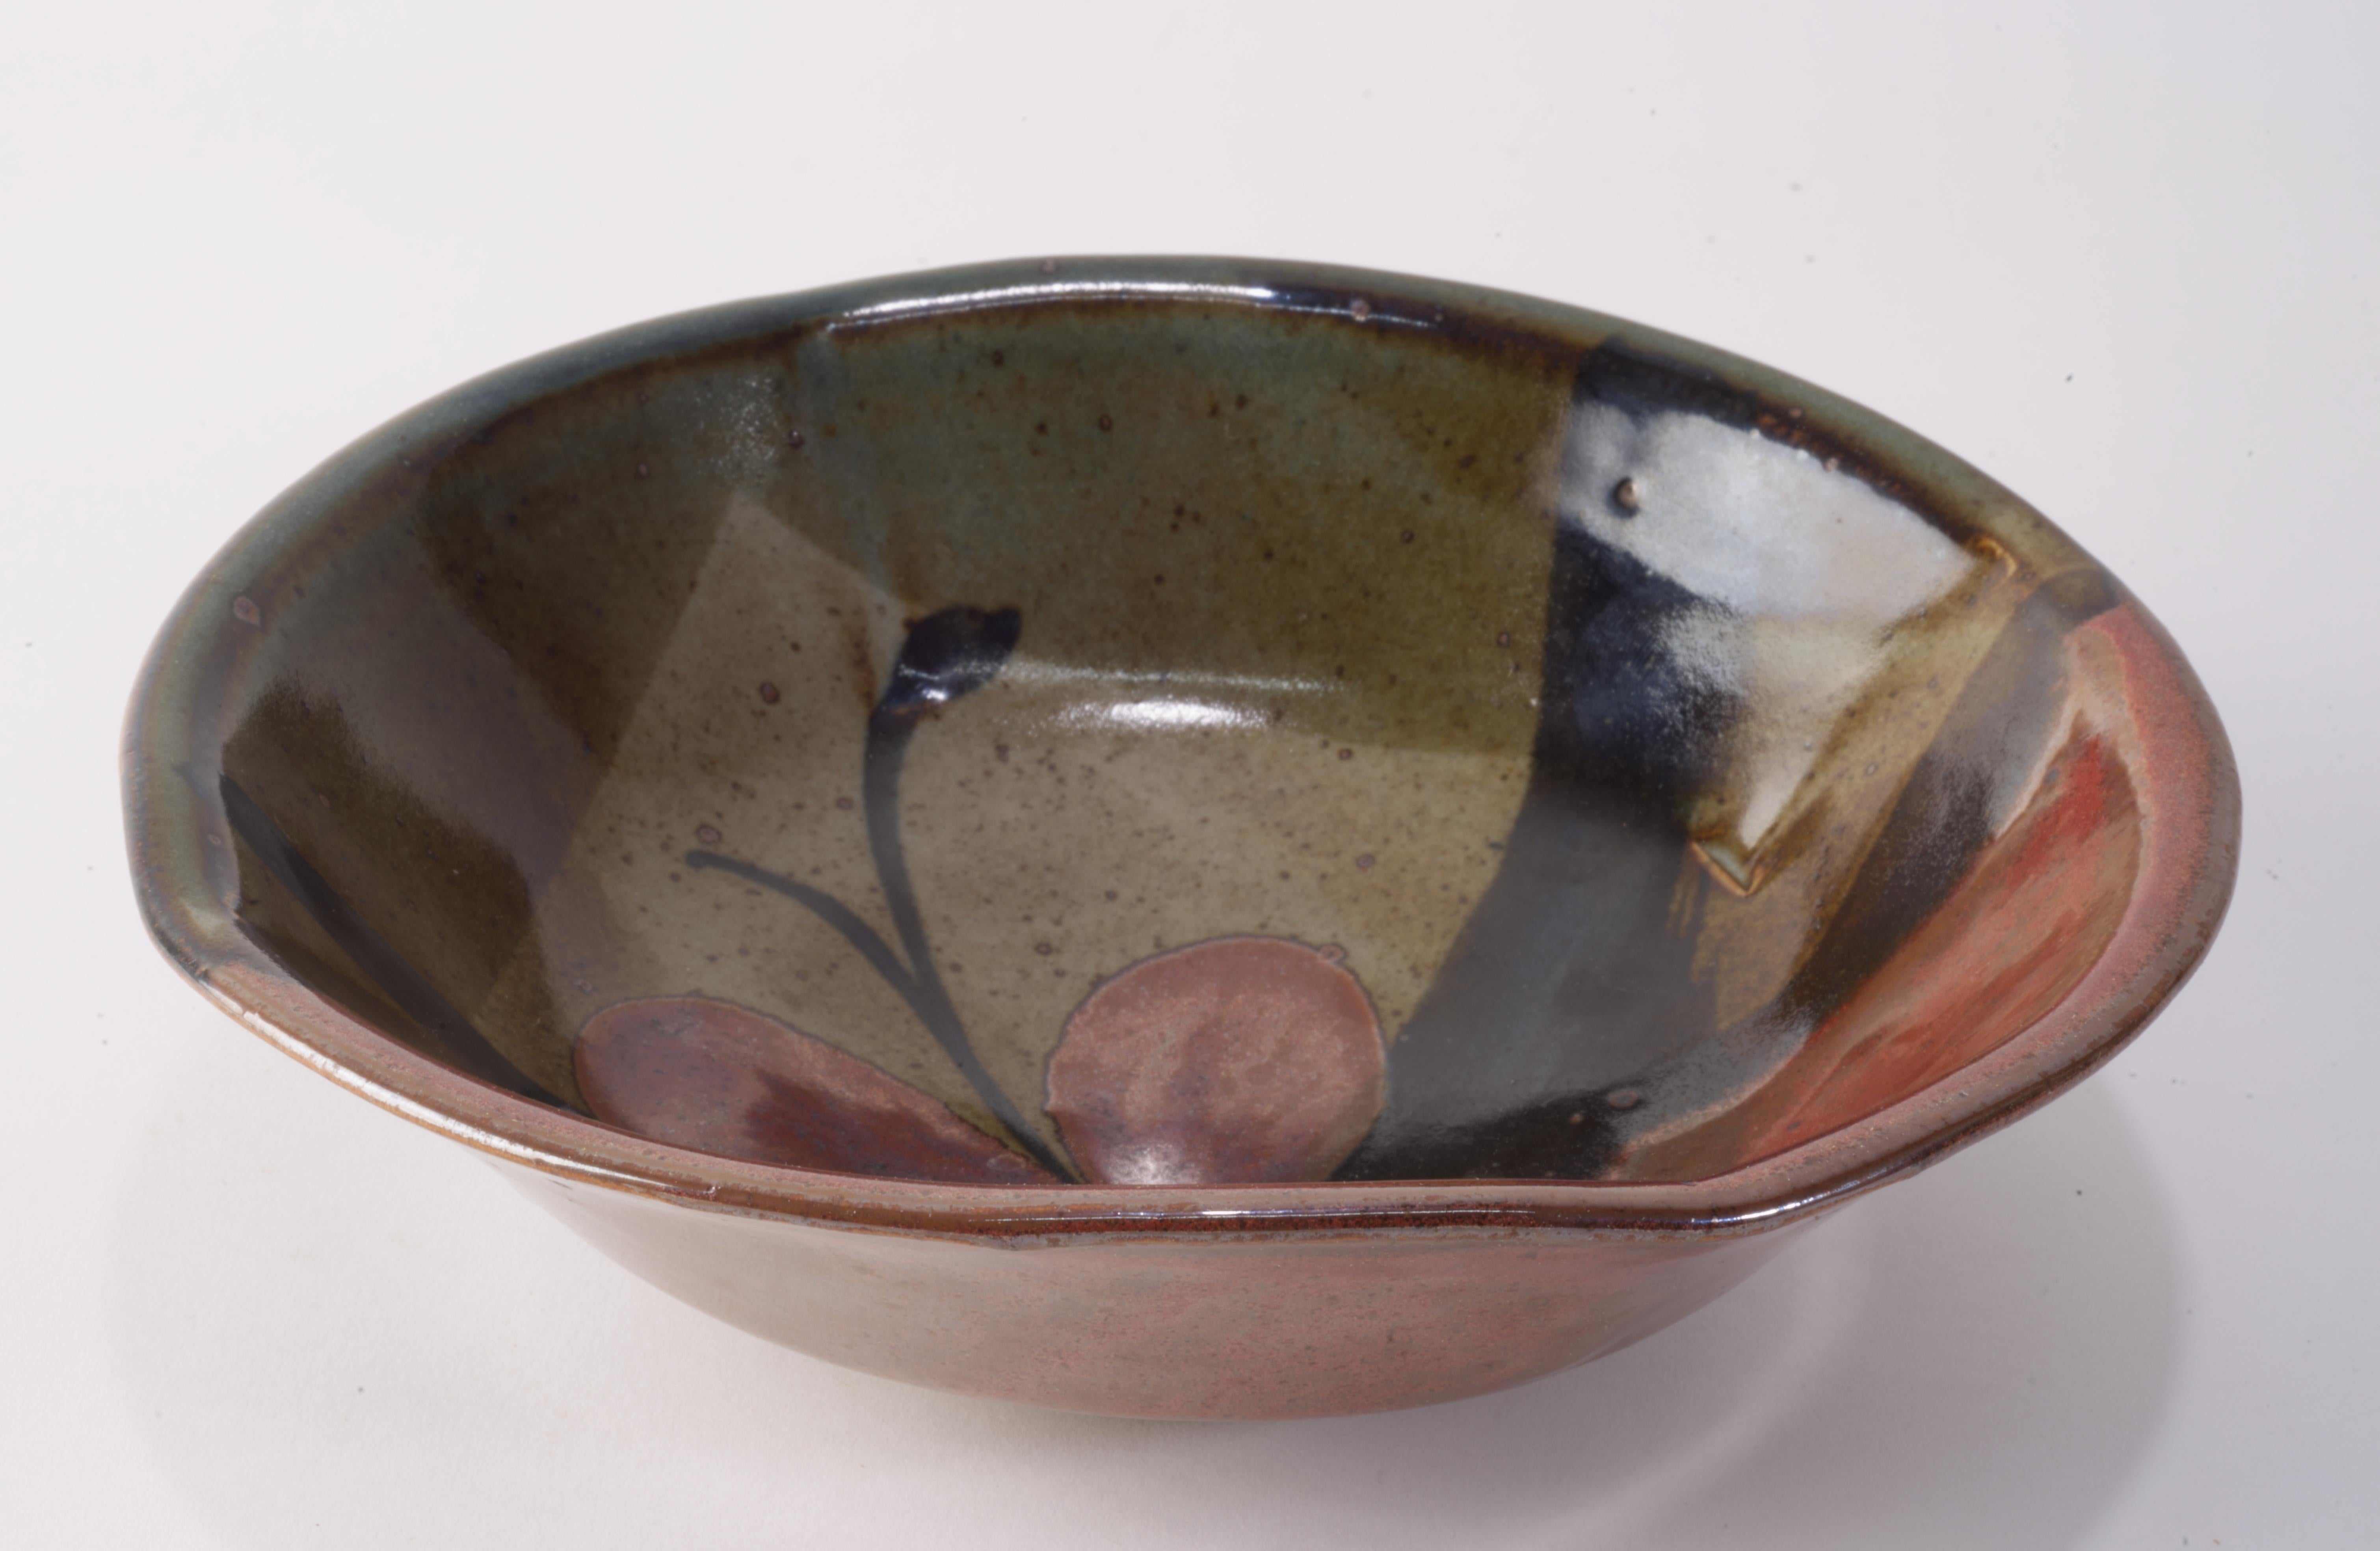 John Freimarck Calligraphy Inspired Bowl Organic Art Pottery 1970s In Good Condition For Sale In Clifton Springs, NY